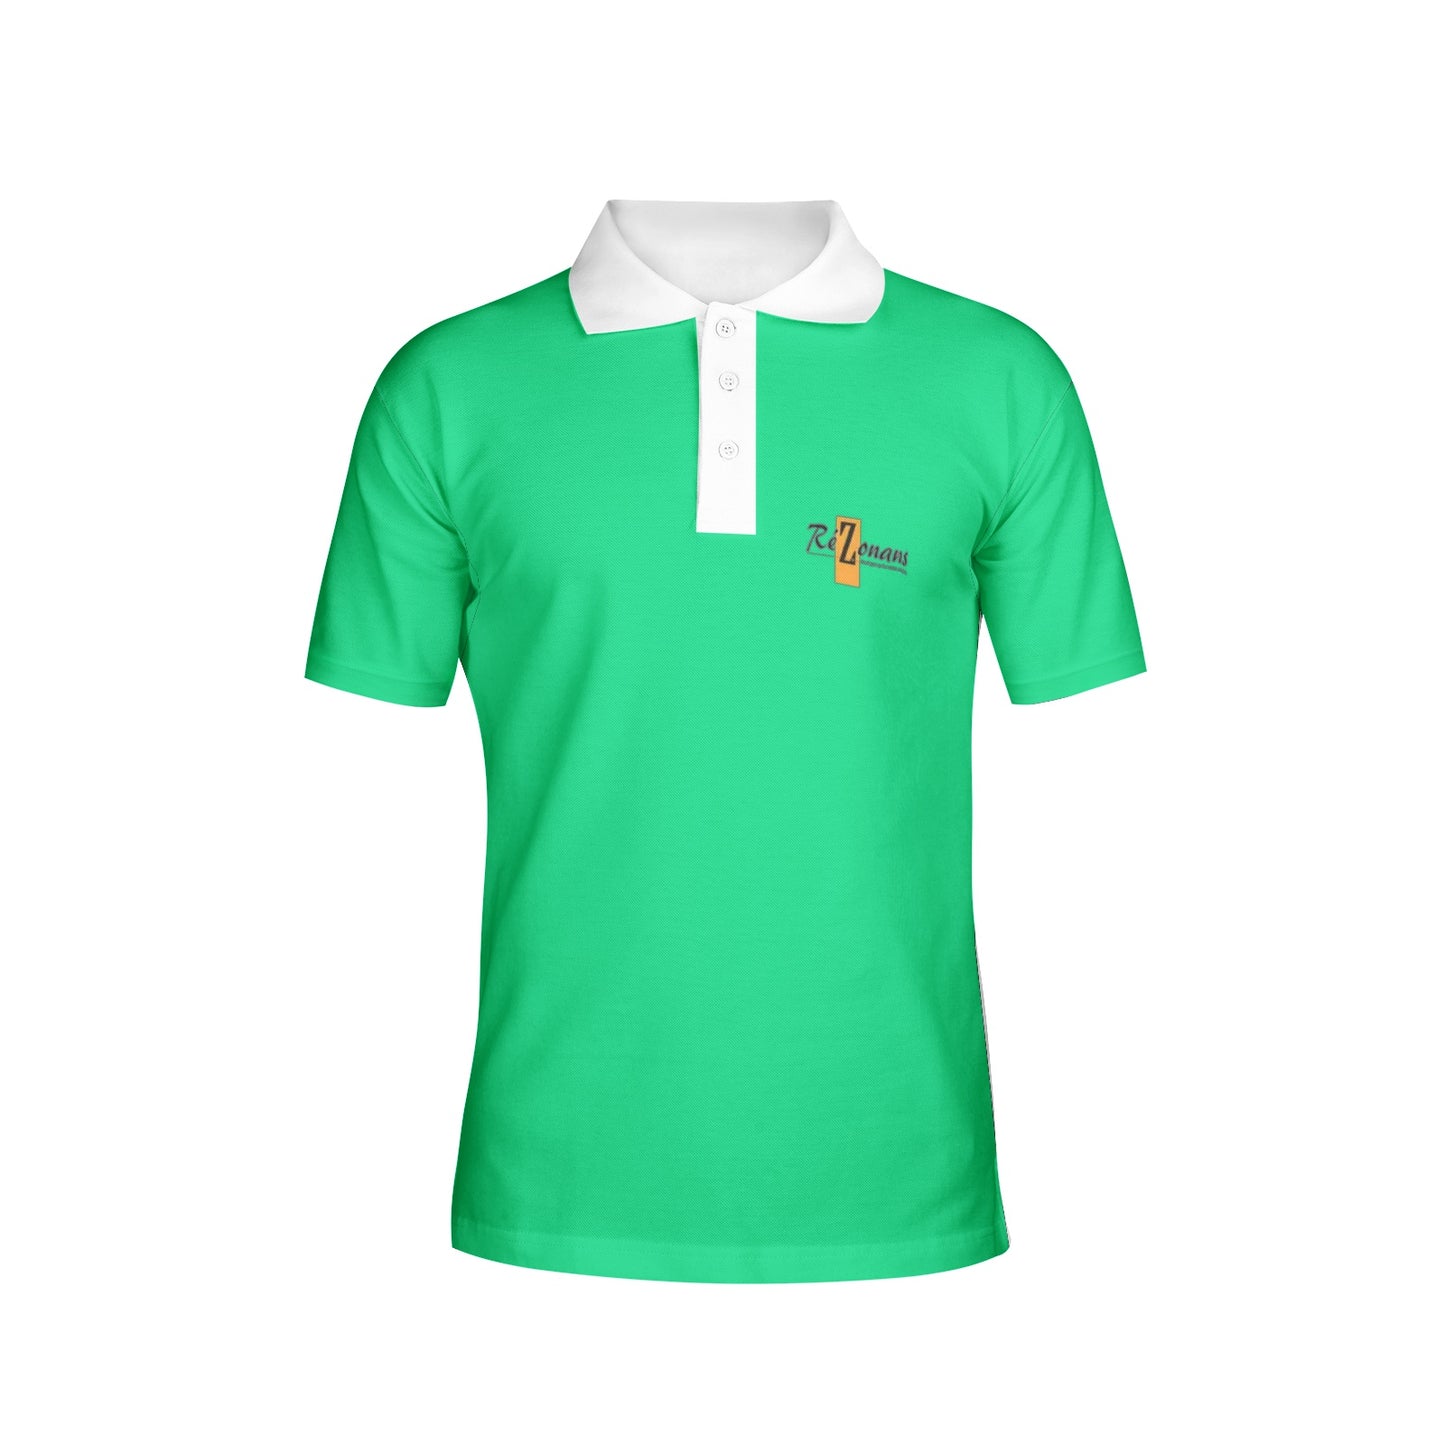 "Turquoise" collector's polo shirt